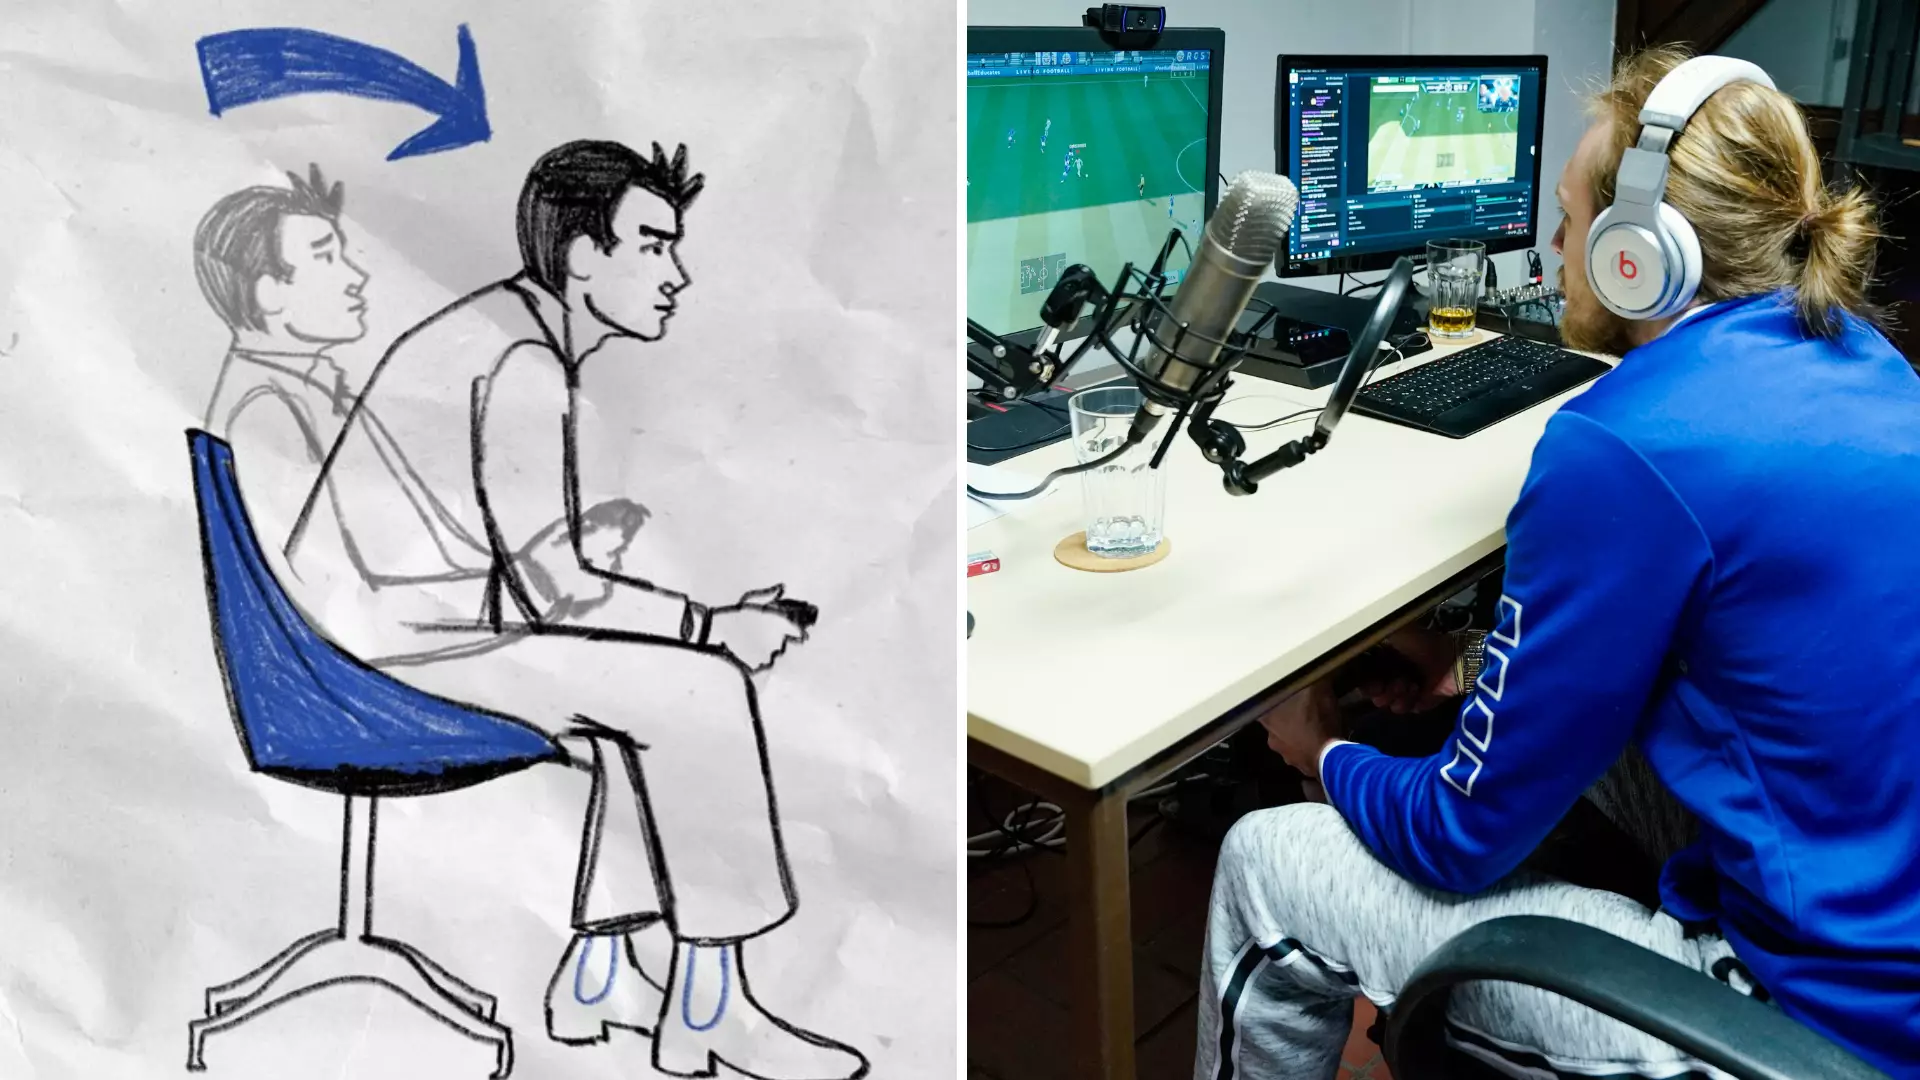 New Study Reveals The 'Gamer Lean' Is A Real Phenomenon And Can Help You Win At FIFA 21